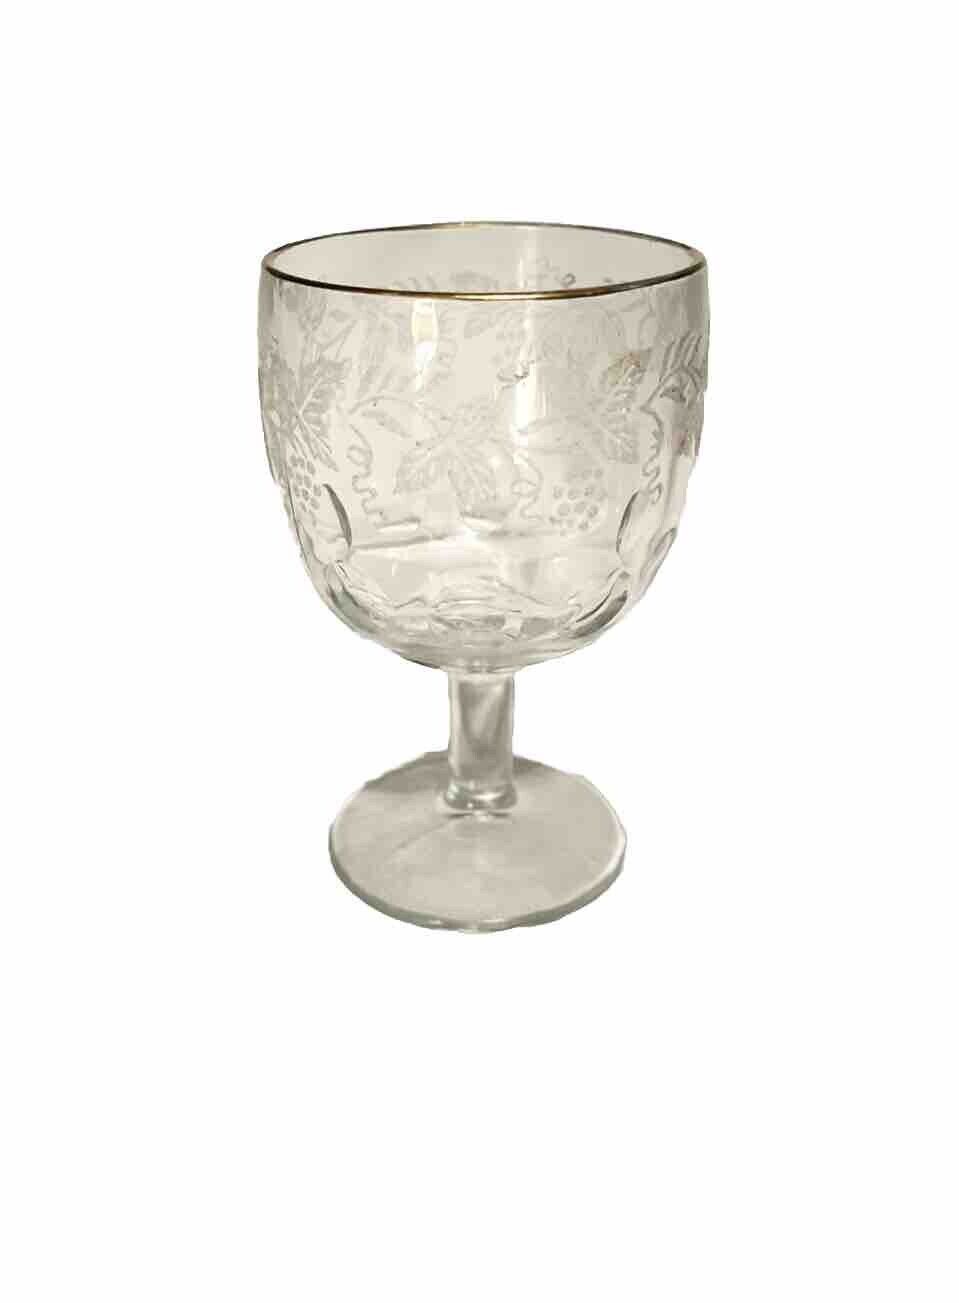 ANTIQUE VICTORIAN EARLY GLASS GOBLET CHALICE WITH FLORAL DECORATION